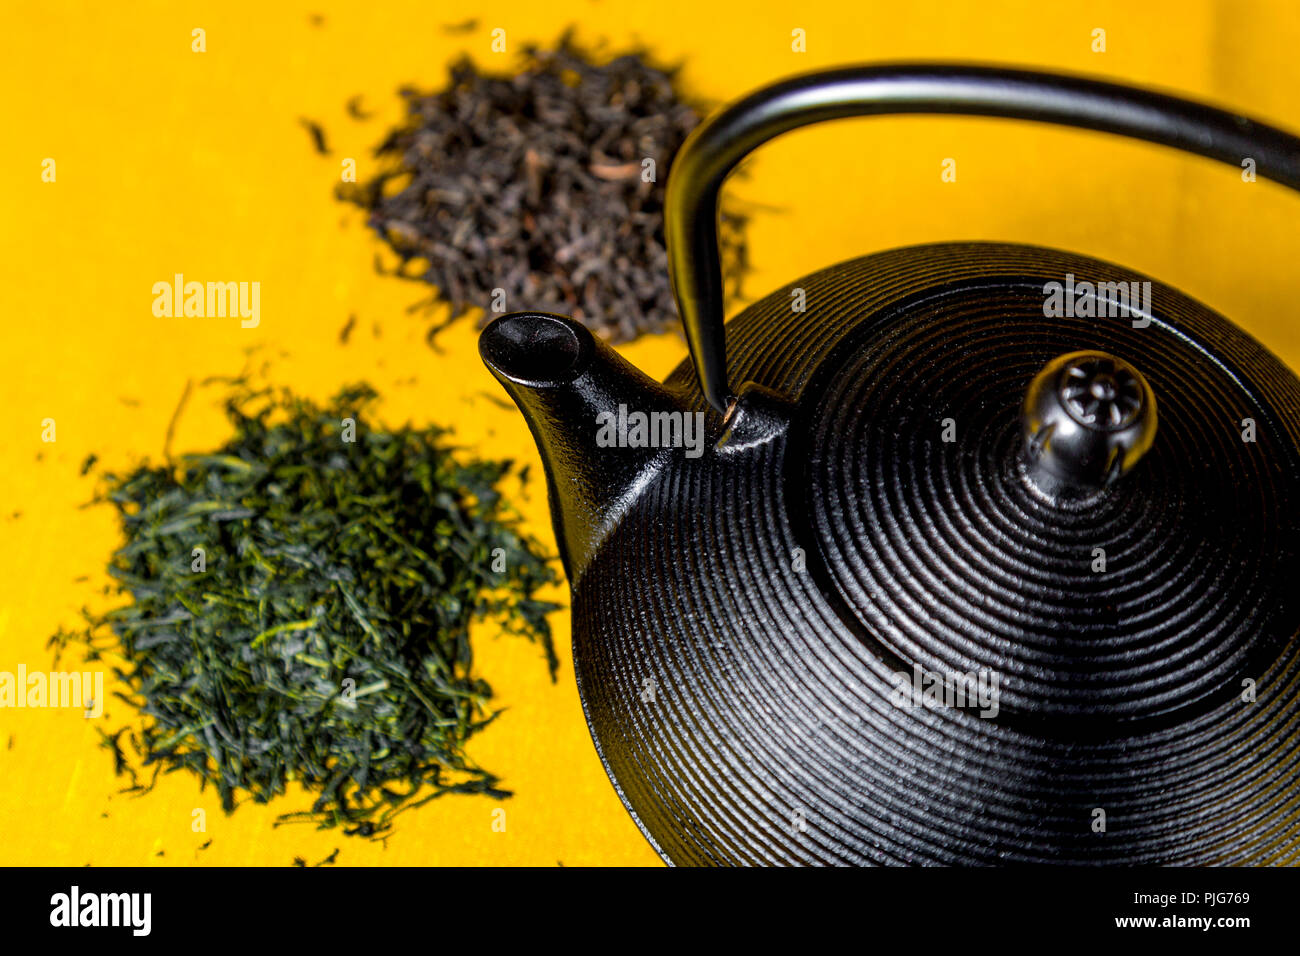 Cast Iron teapot (tetsubin) with loose leaf black and green tea piles against yellow background Stock Photo